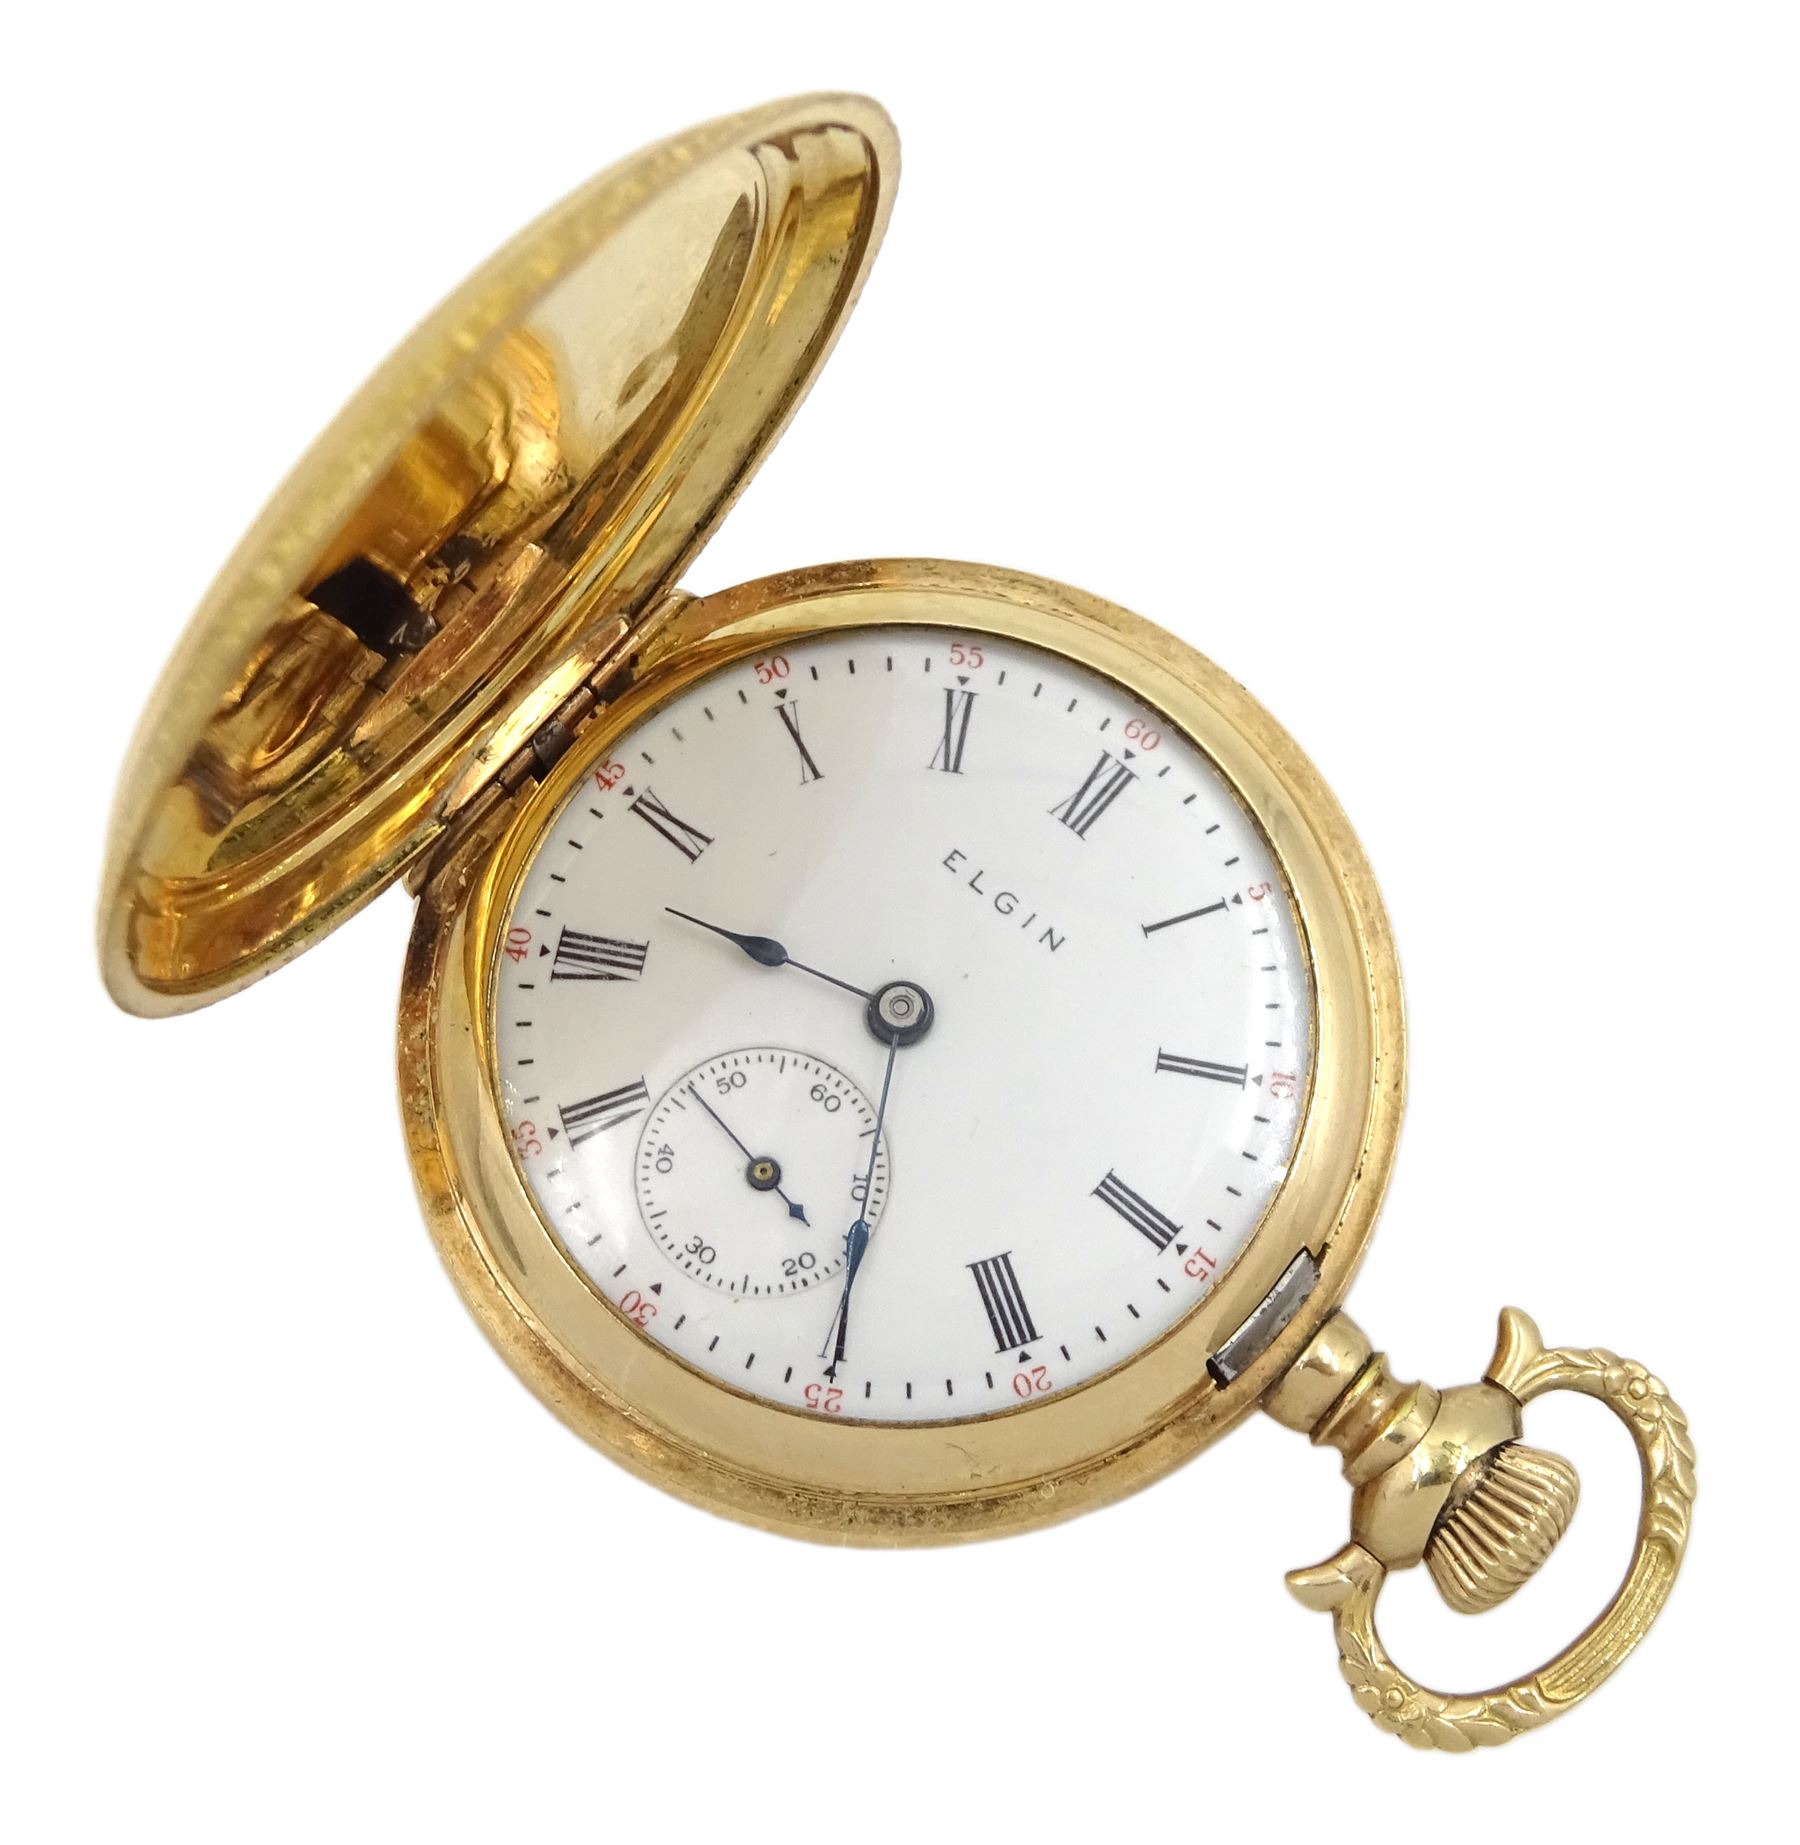 Early 20th century gold full hunter lever fob watch by Elgin